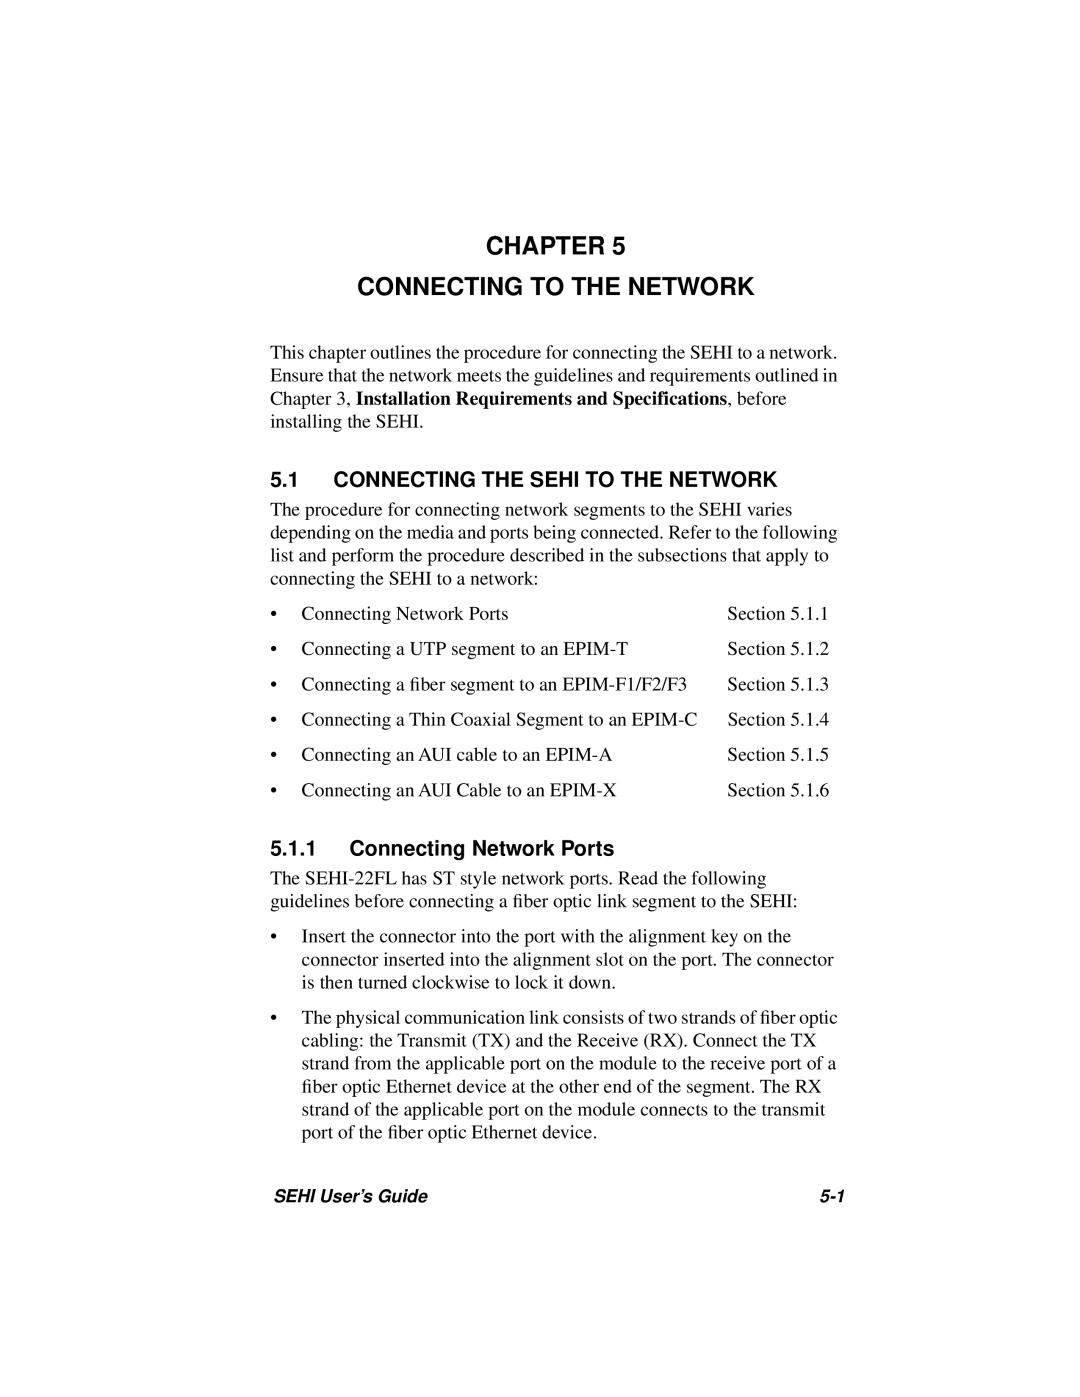 Cabletron Systems SEHI-22FL manual Chapter Connecting To The Network, Connecting The Sehi To The Network 